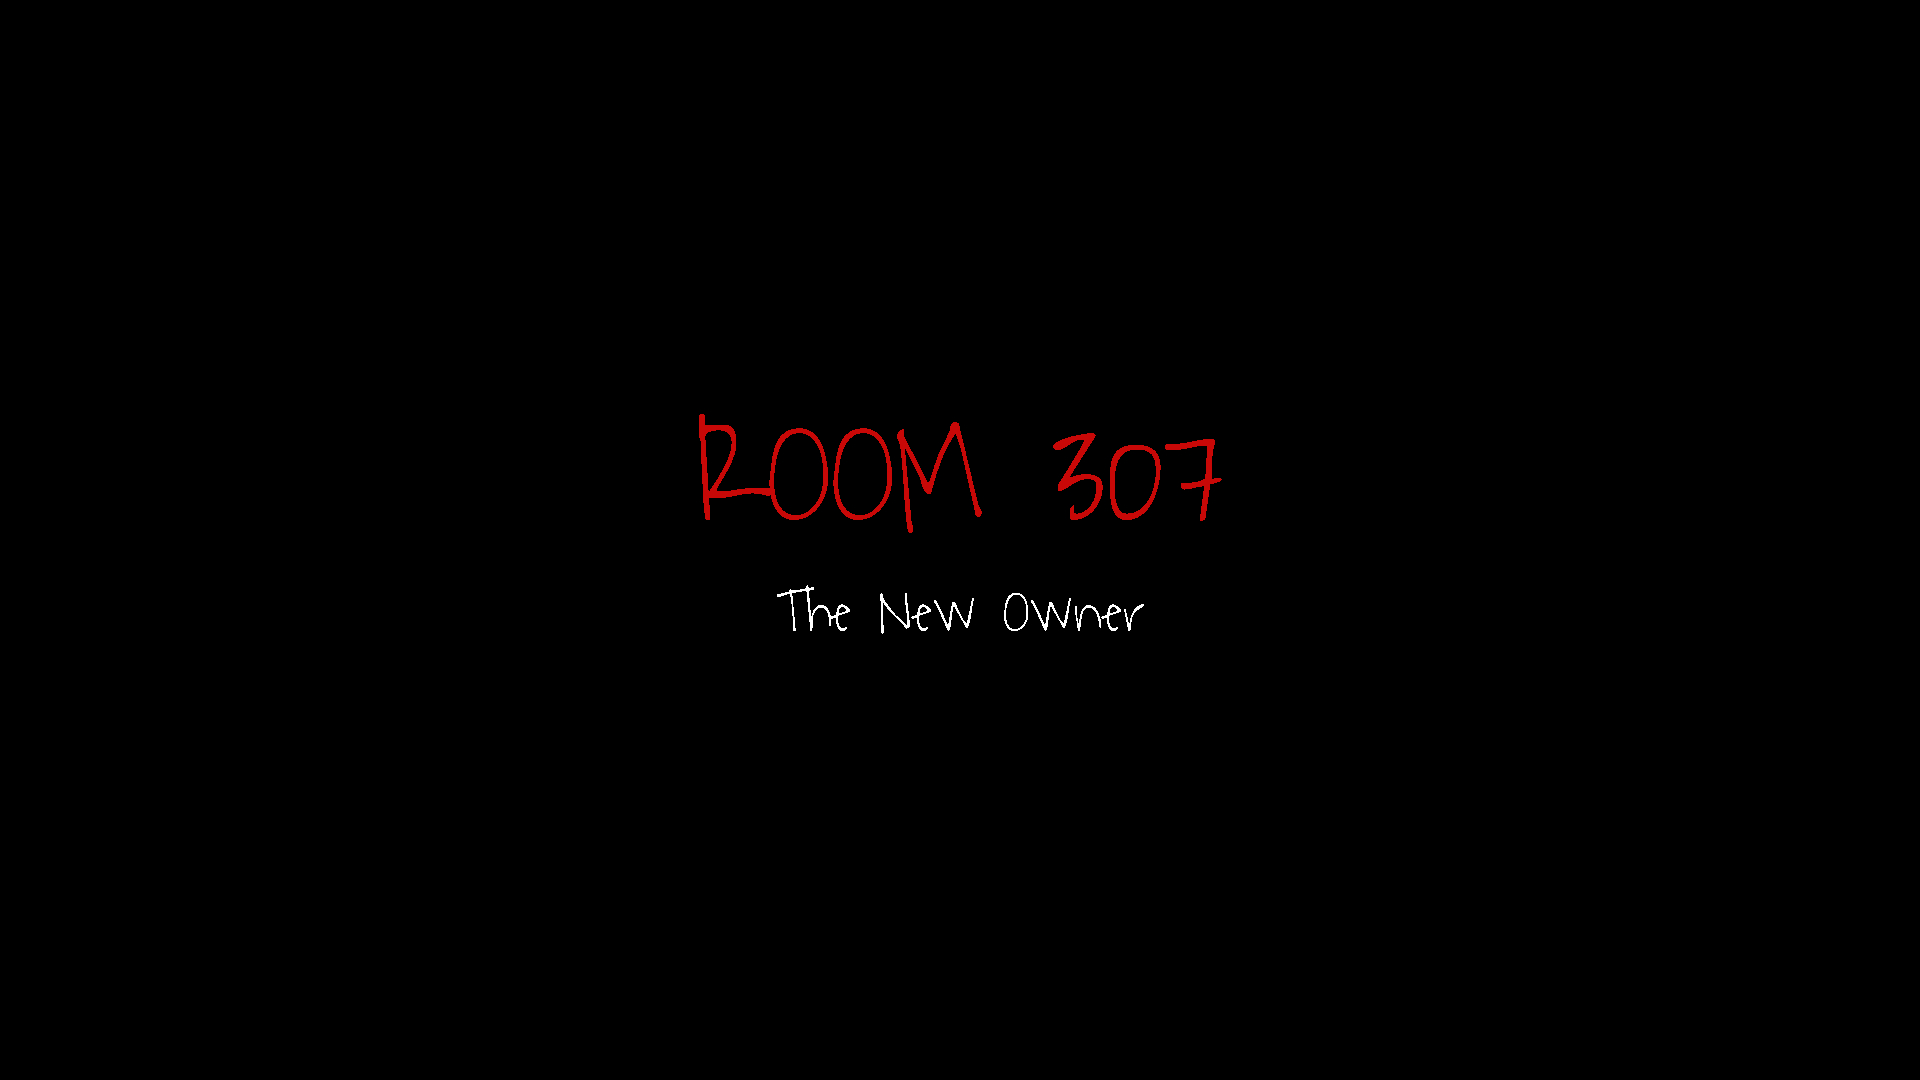 Room 307: The New Owner